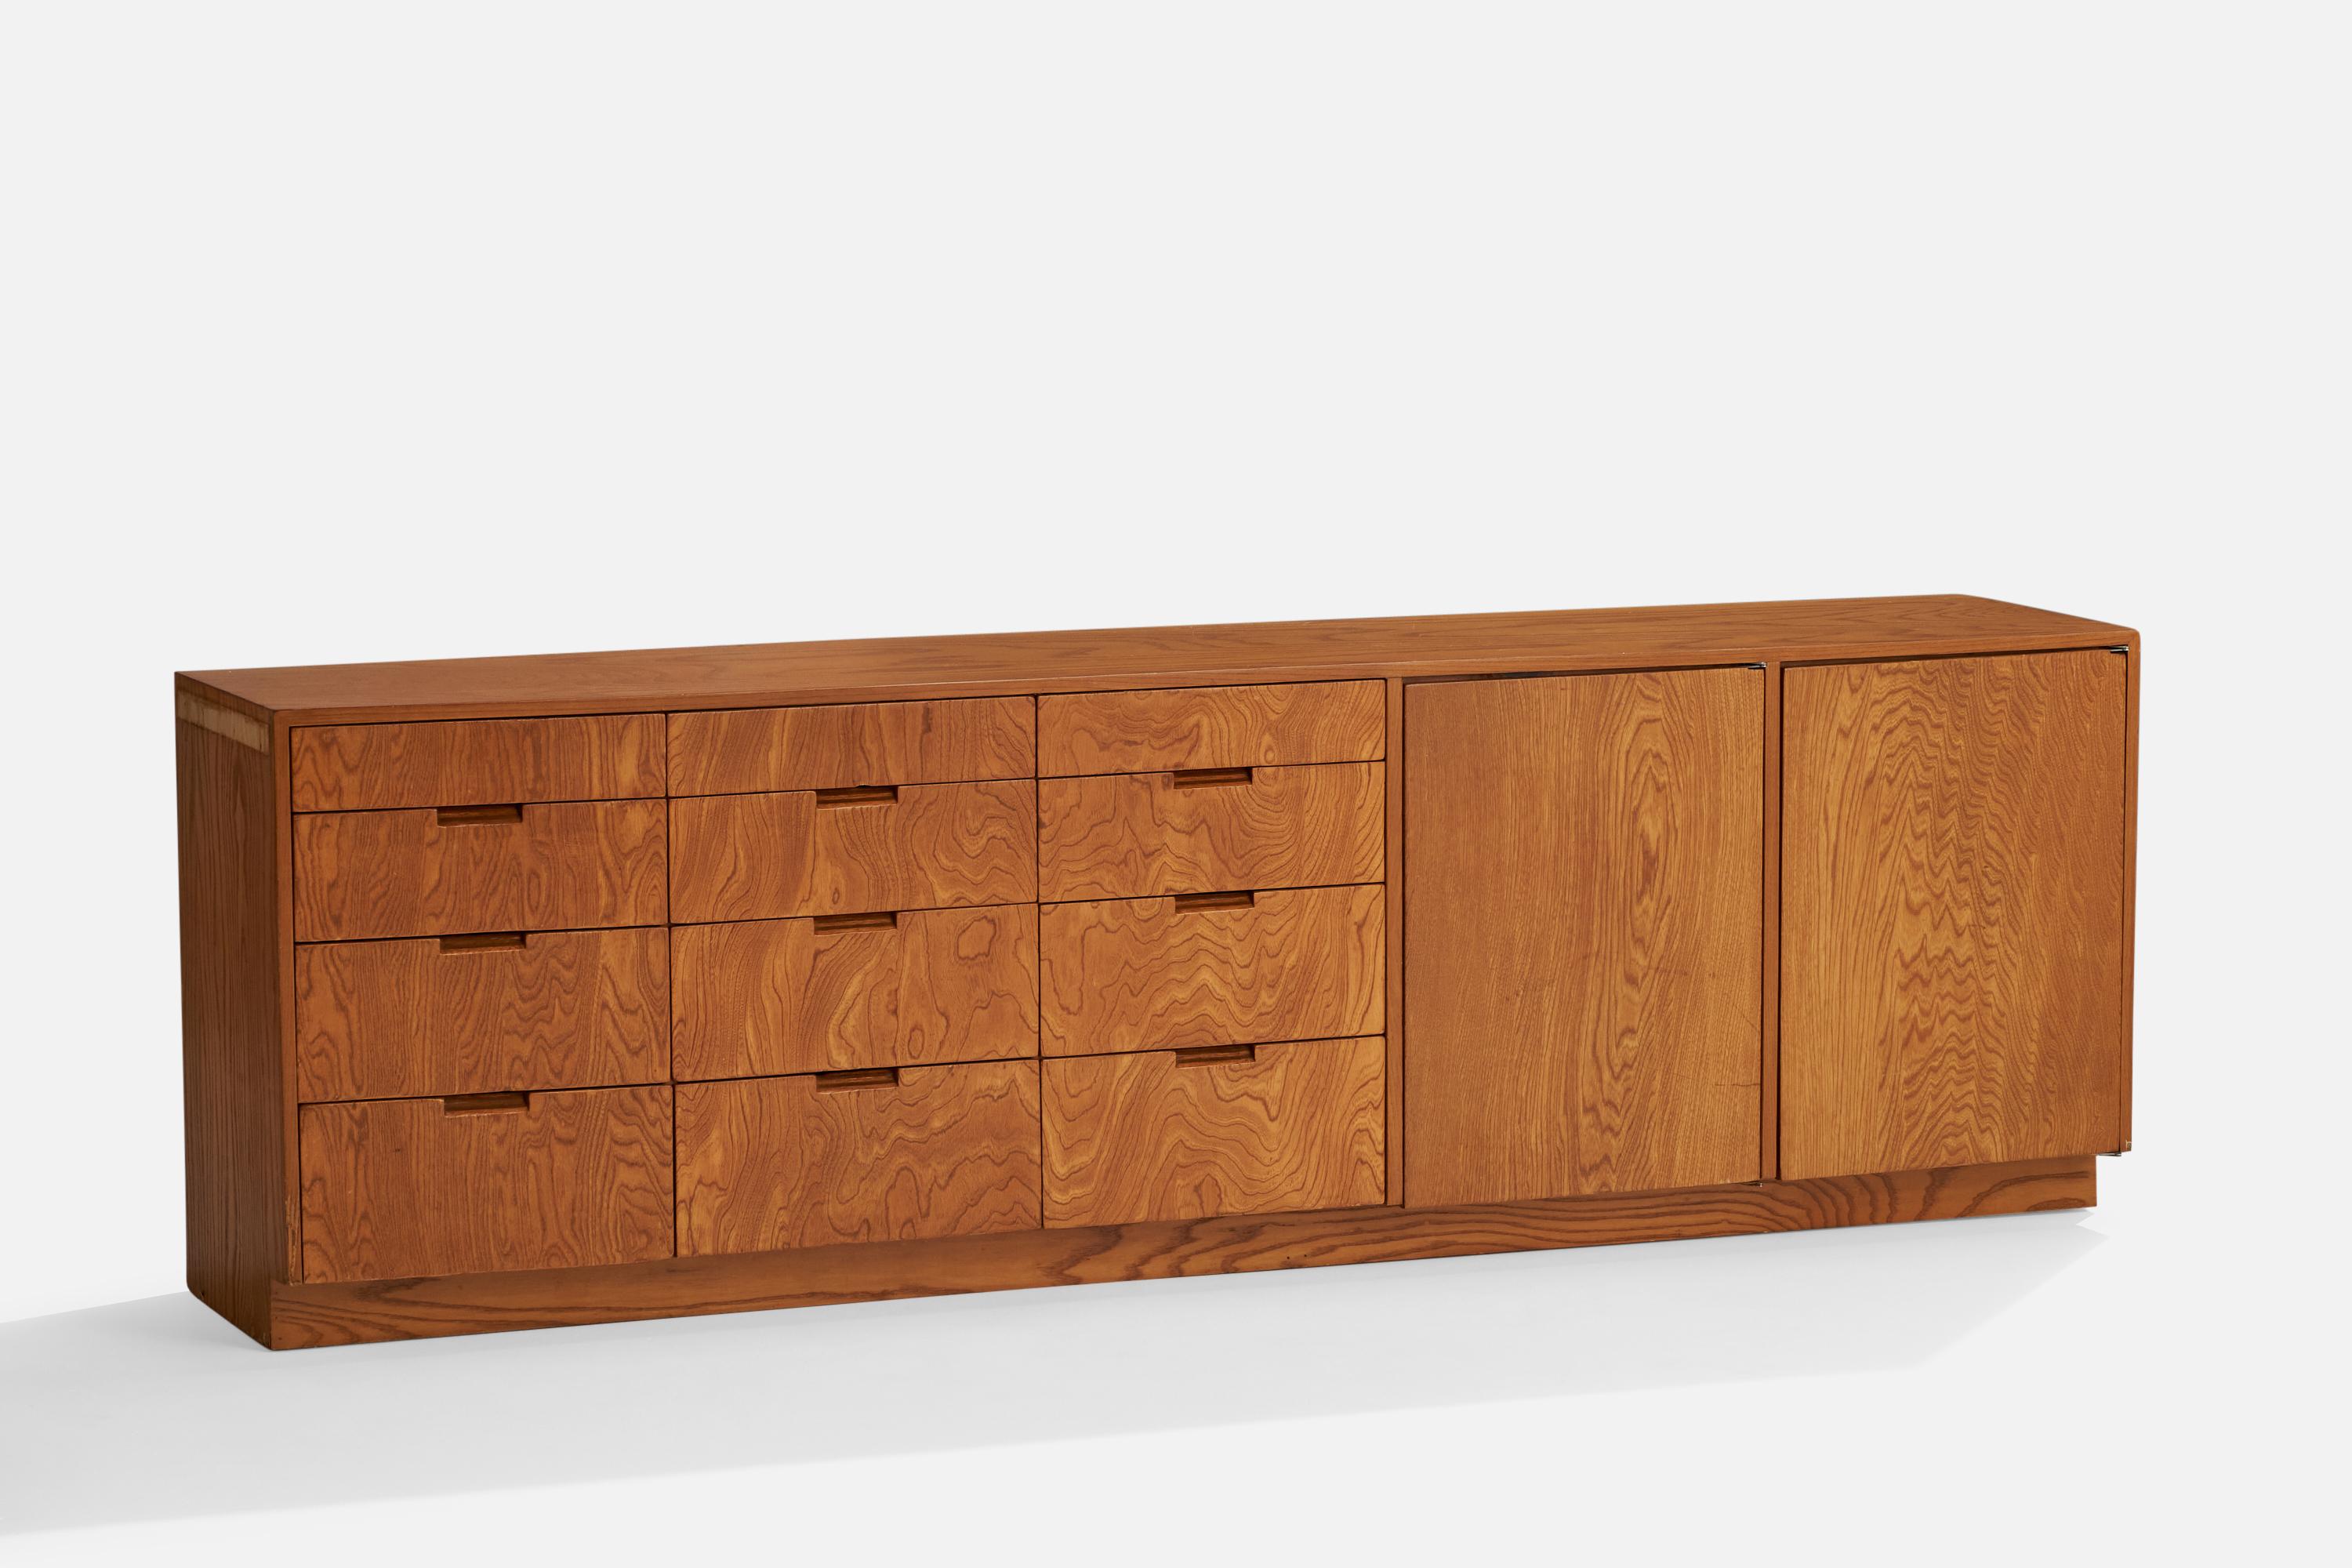 A unique and sizeable cabinet or sideboard. Designed by Richard Neutra for the Brown Sidney House, Holmby Hills, Los Angeles, c. 1955. 

Detailed provenance available upon request,
